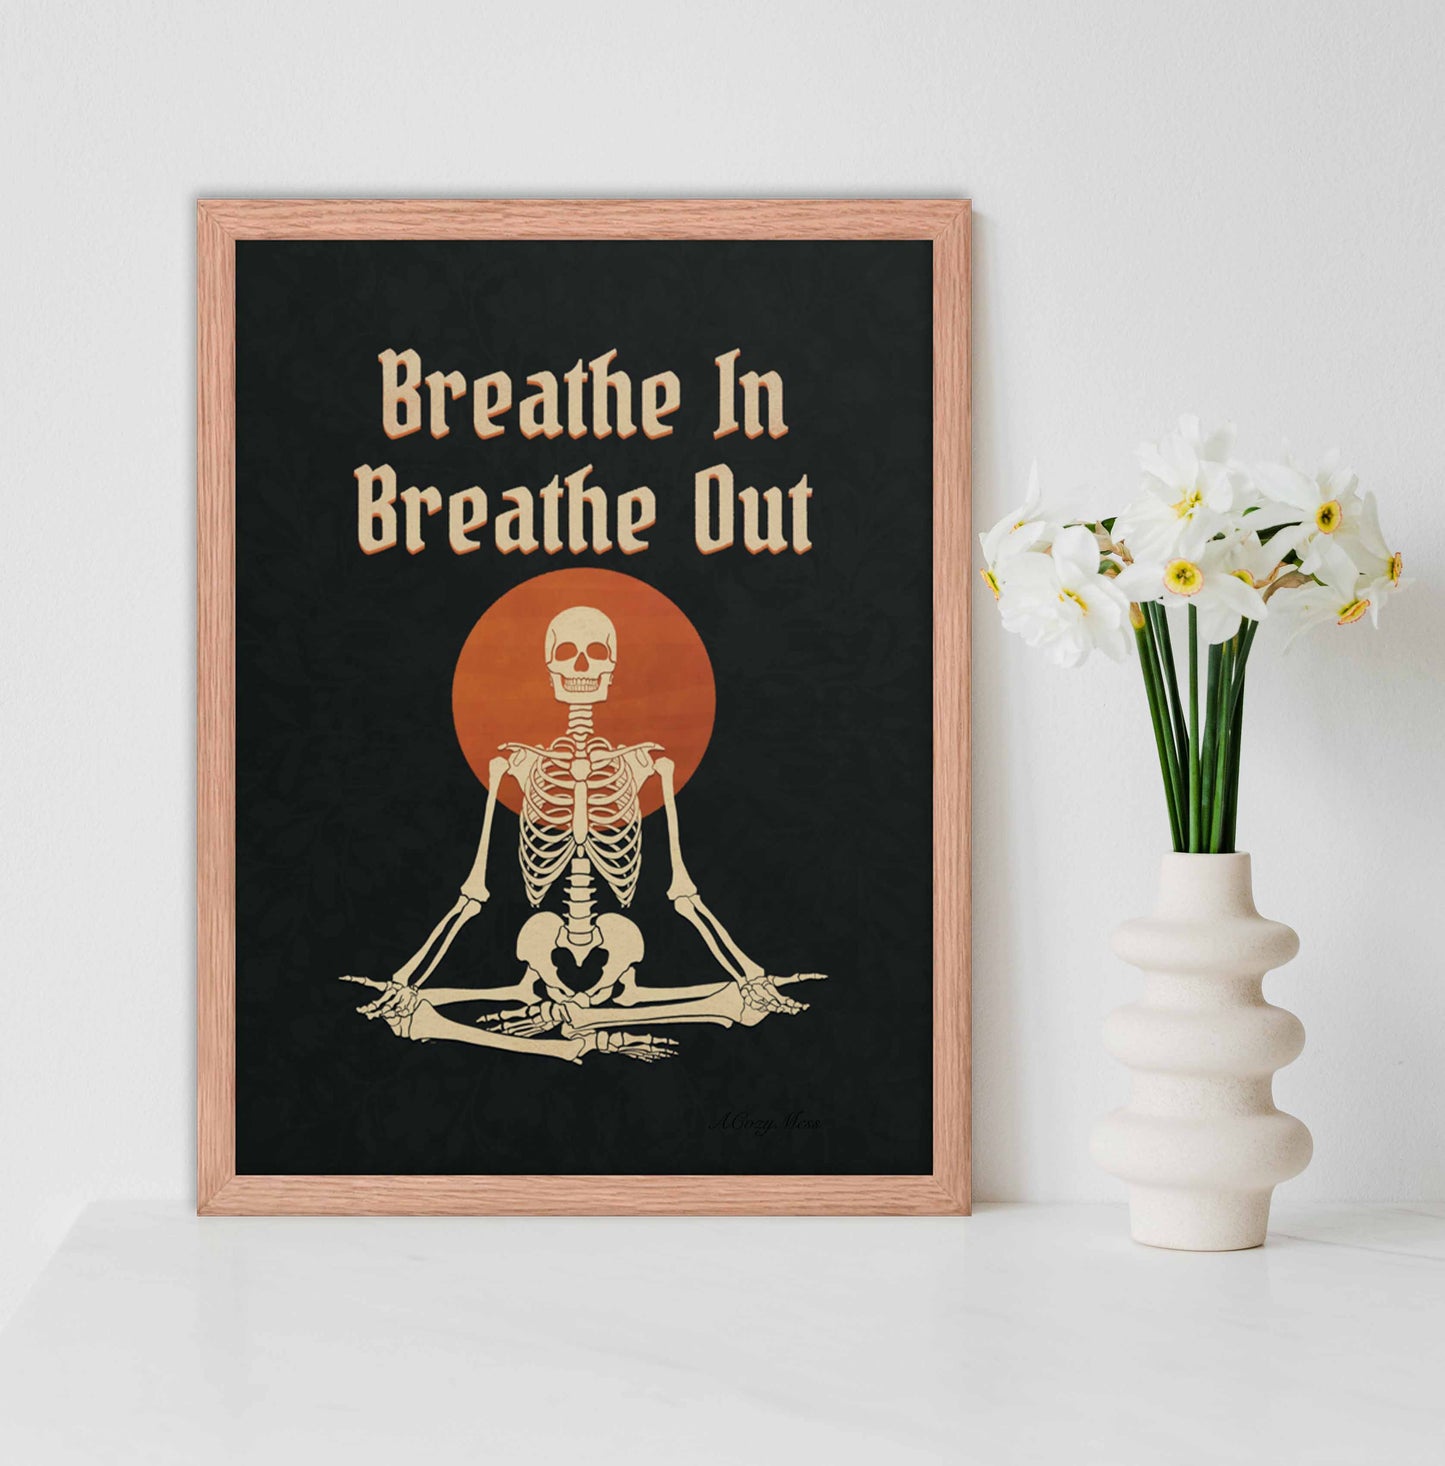 Oak Framed wall art of " Breathe in breathe Out" with an illustration of a meditating skeleton